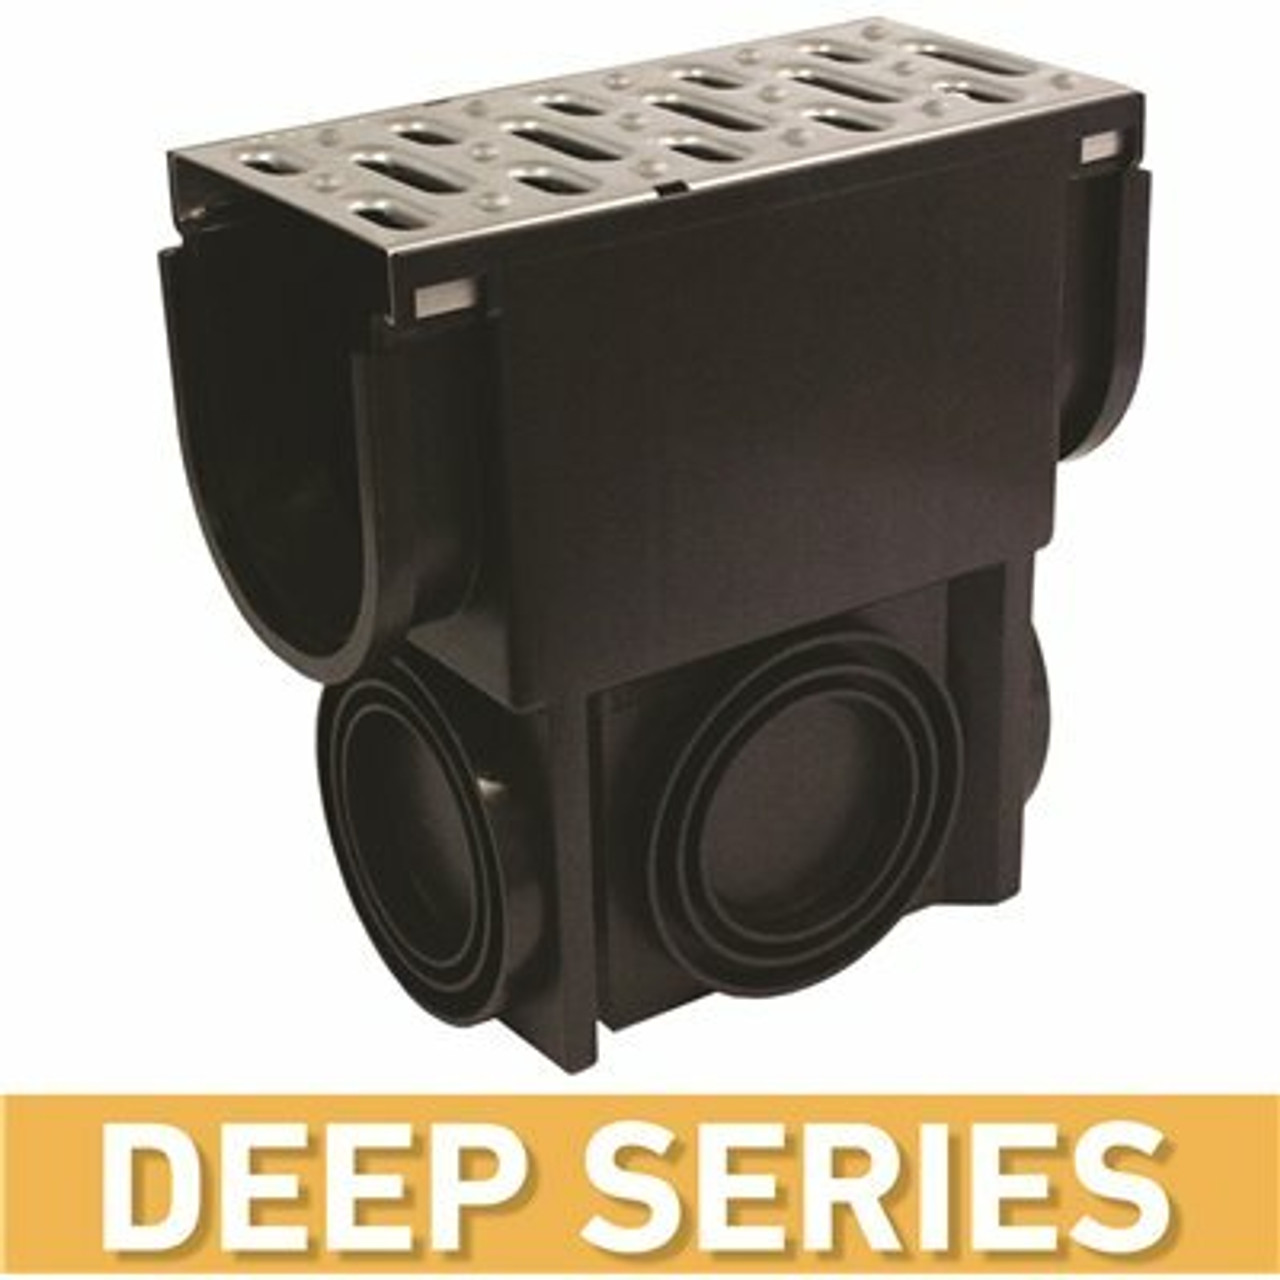 Deep Series Slim Drainage Pit And Catch Basin For Modular Trench And Channel Drain Systems W/ Stainless Steel Grate